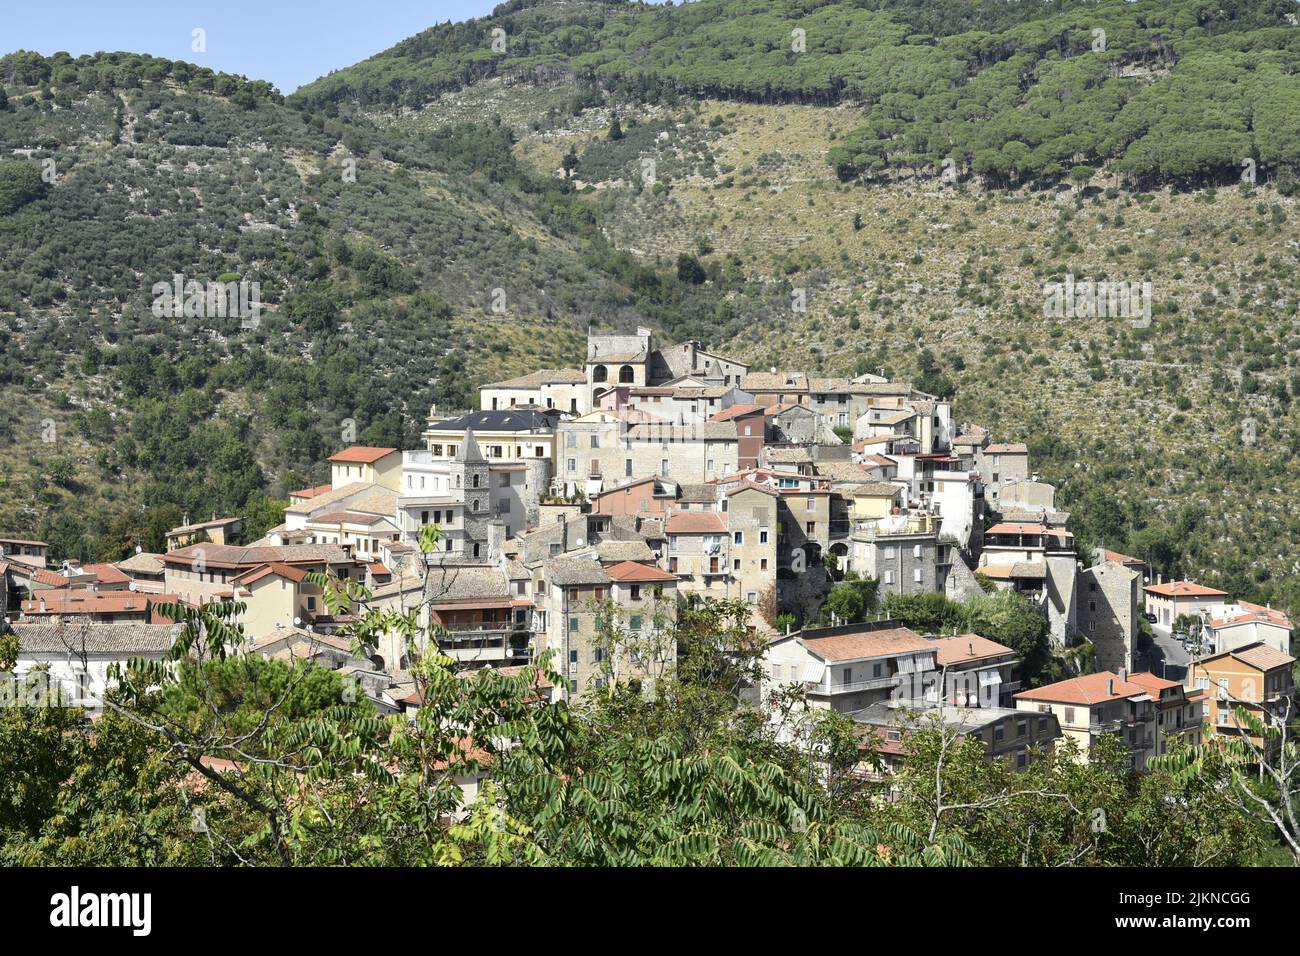 A panoramic view of Lenola village in Italy Stock Photo